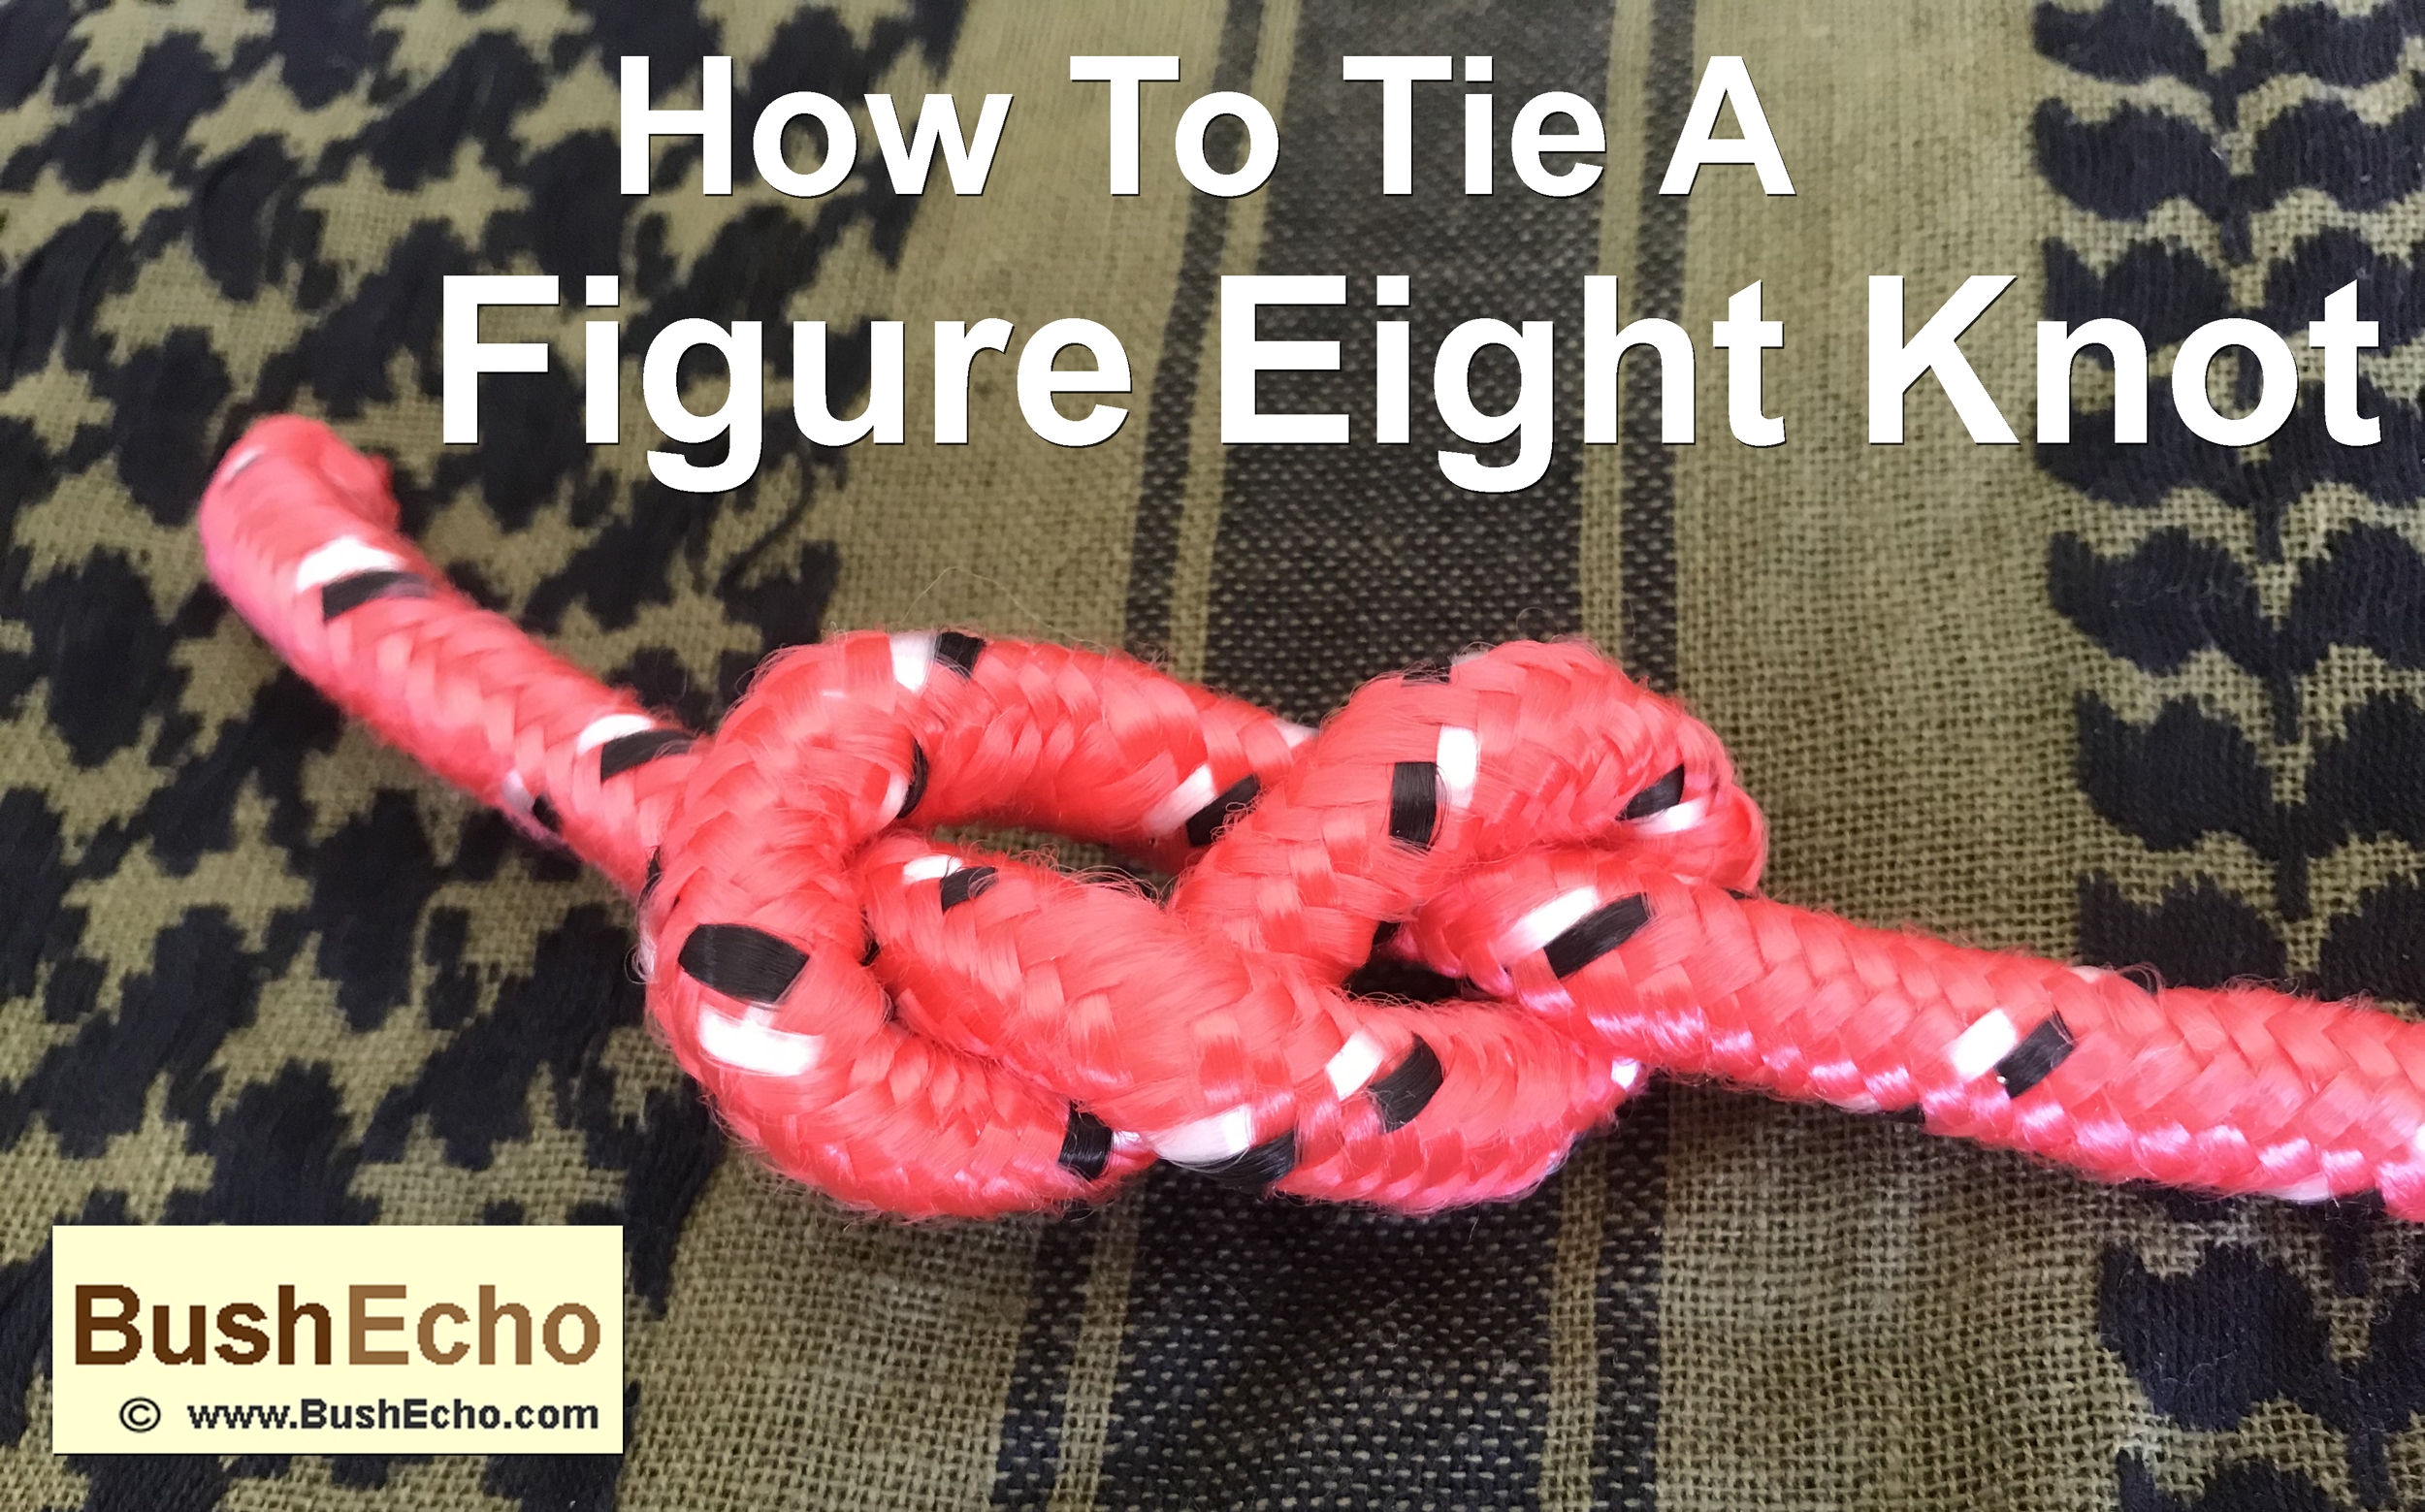 How To Tie A Figure Eight Knot